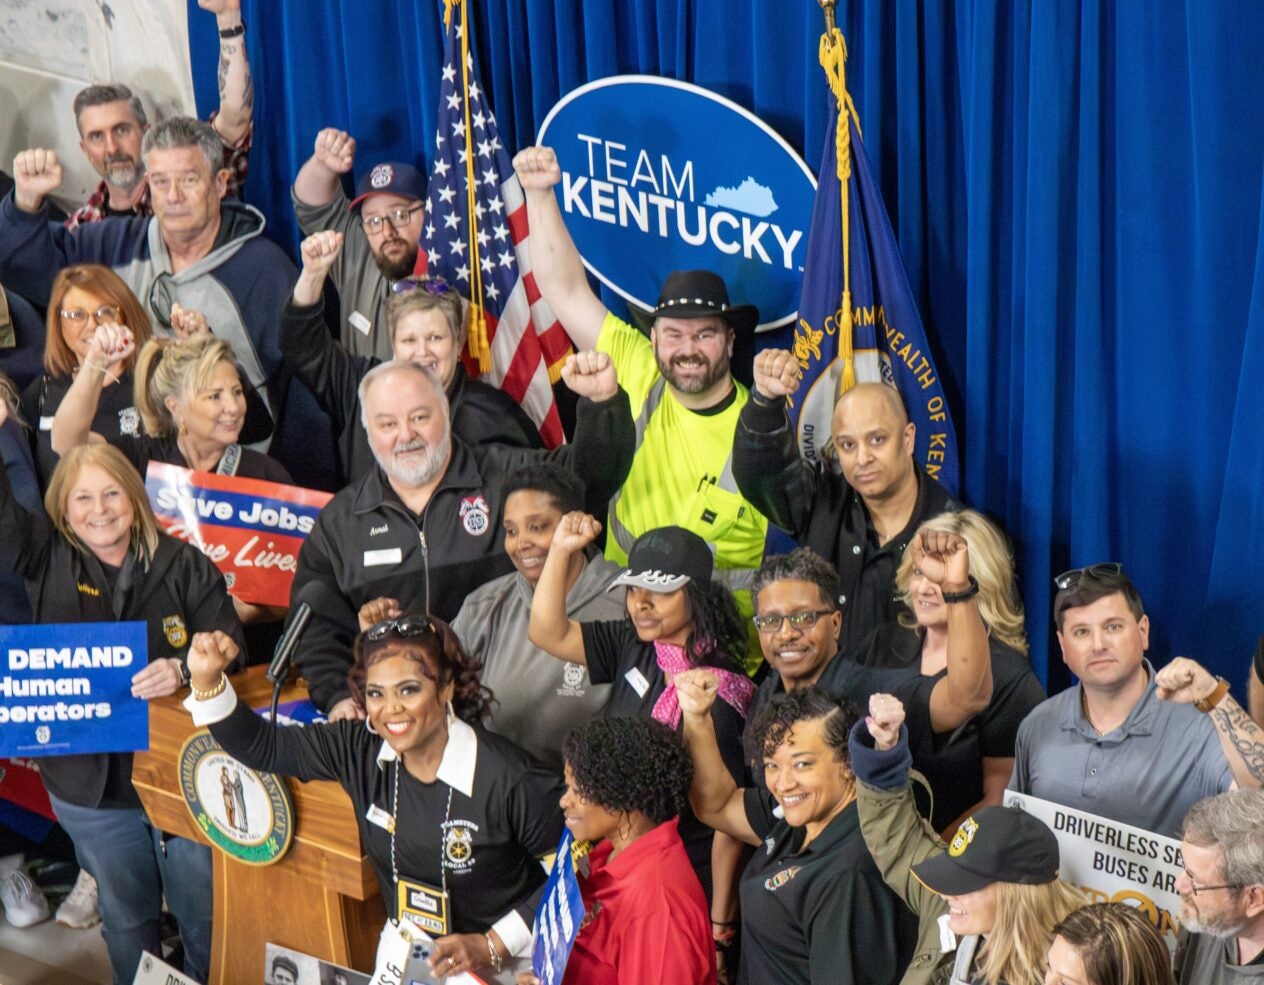 Teamsters opposing HB7 at Kentucky rally